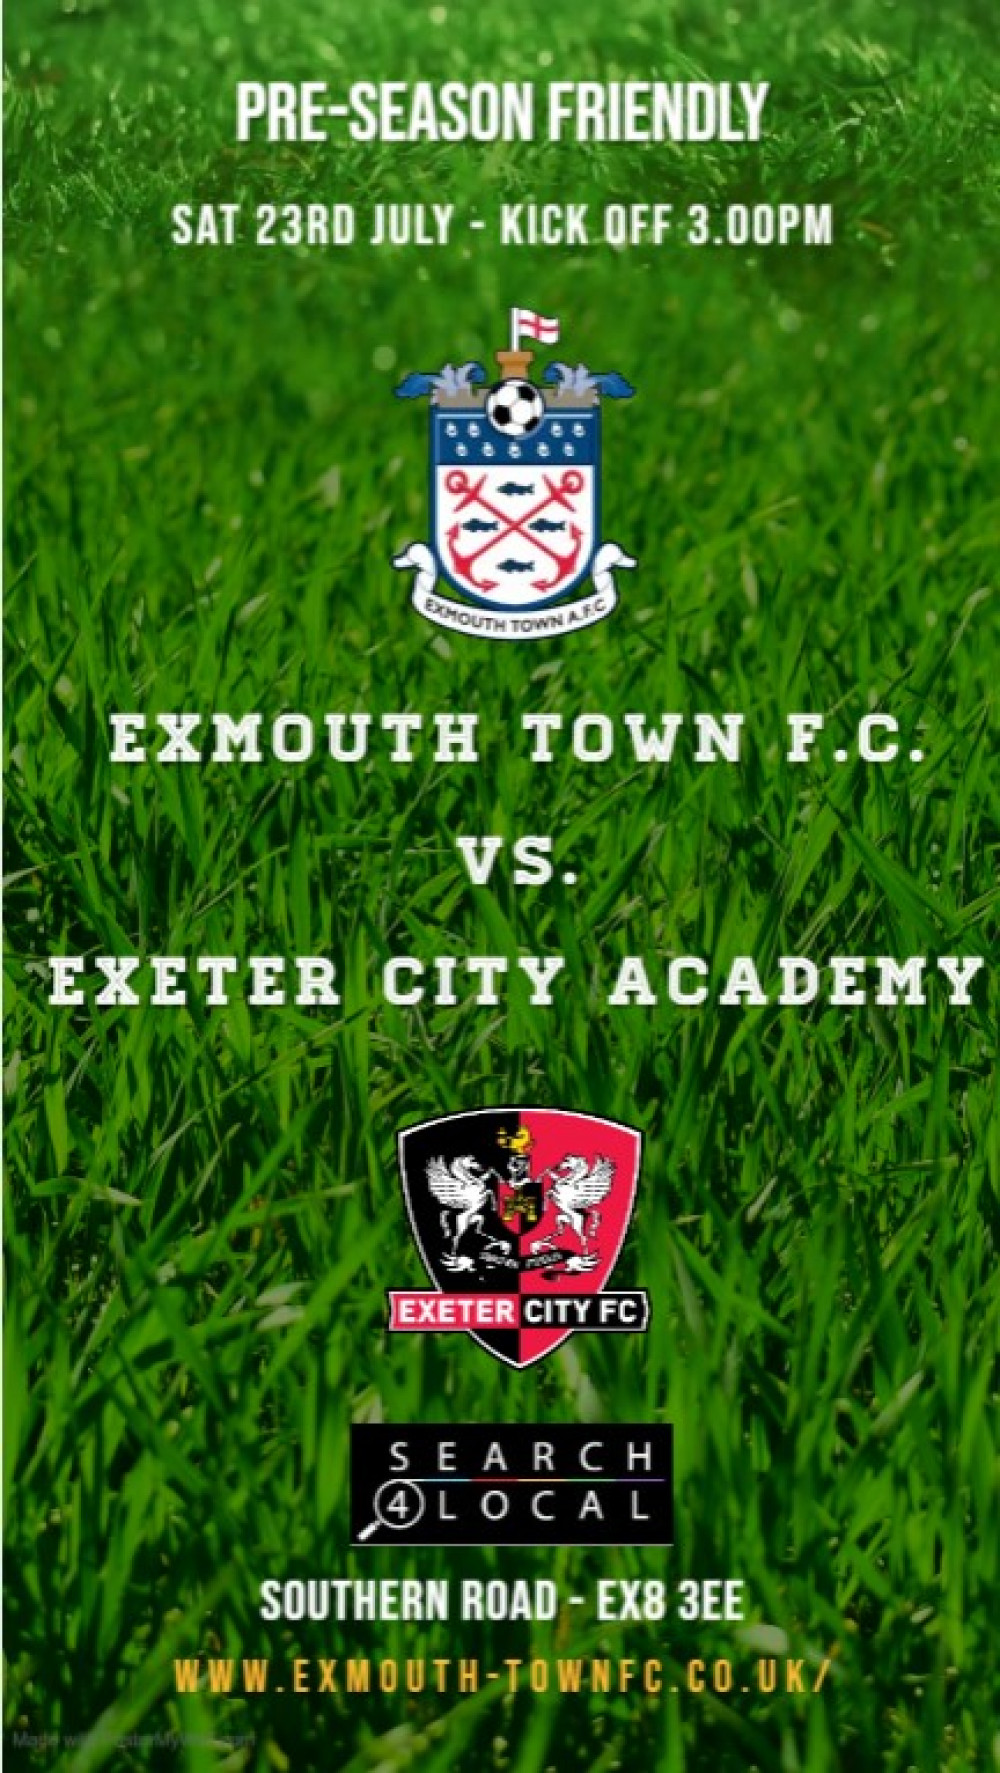 Exmouth Town v Exeter City FC academy 